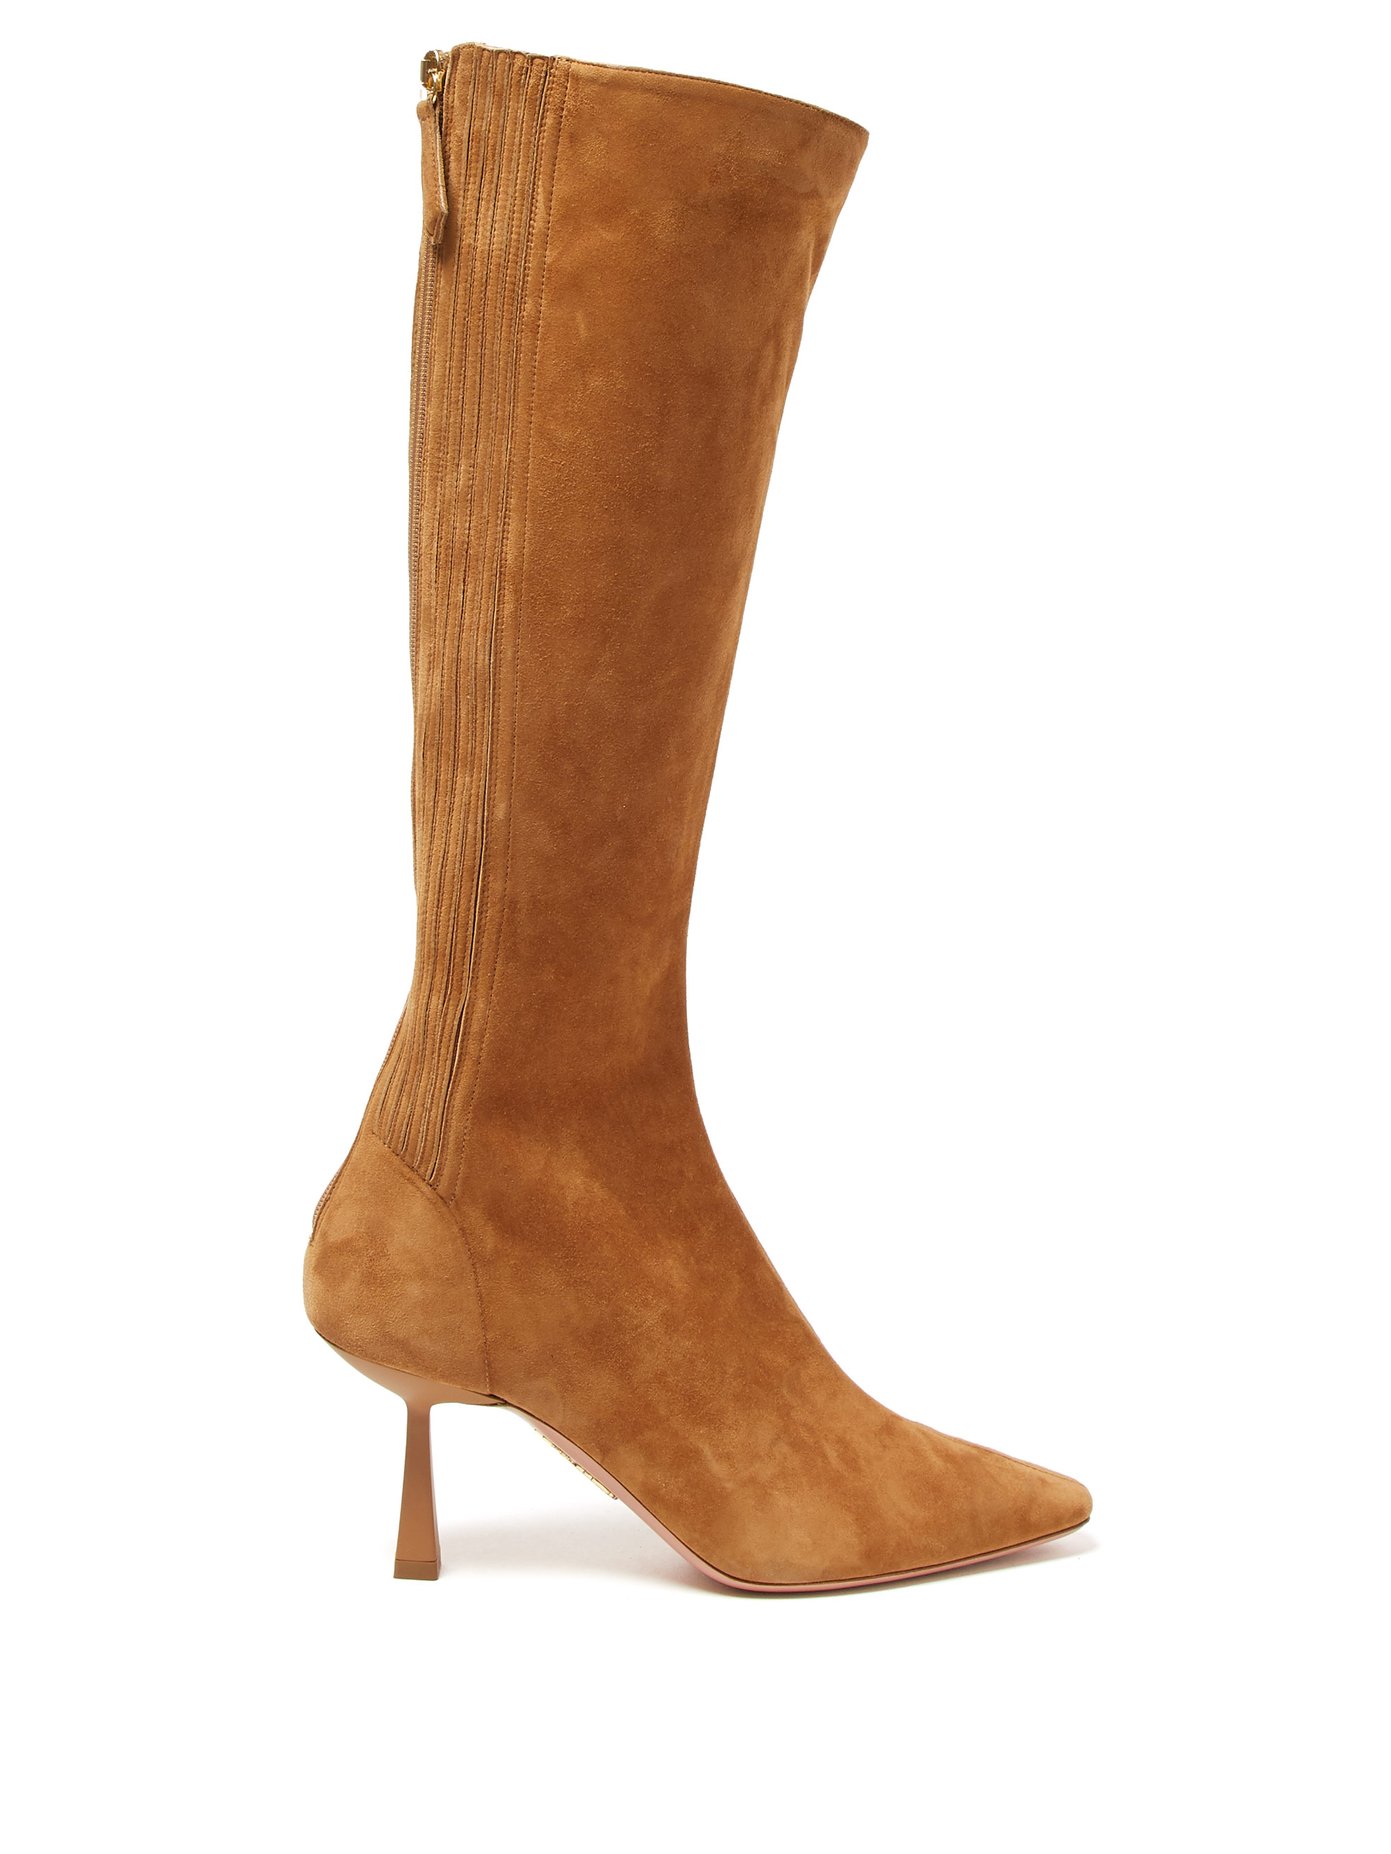 tan suede knee high boots uk